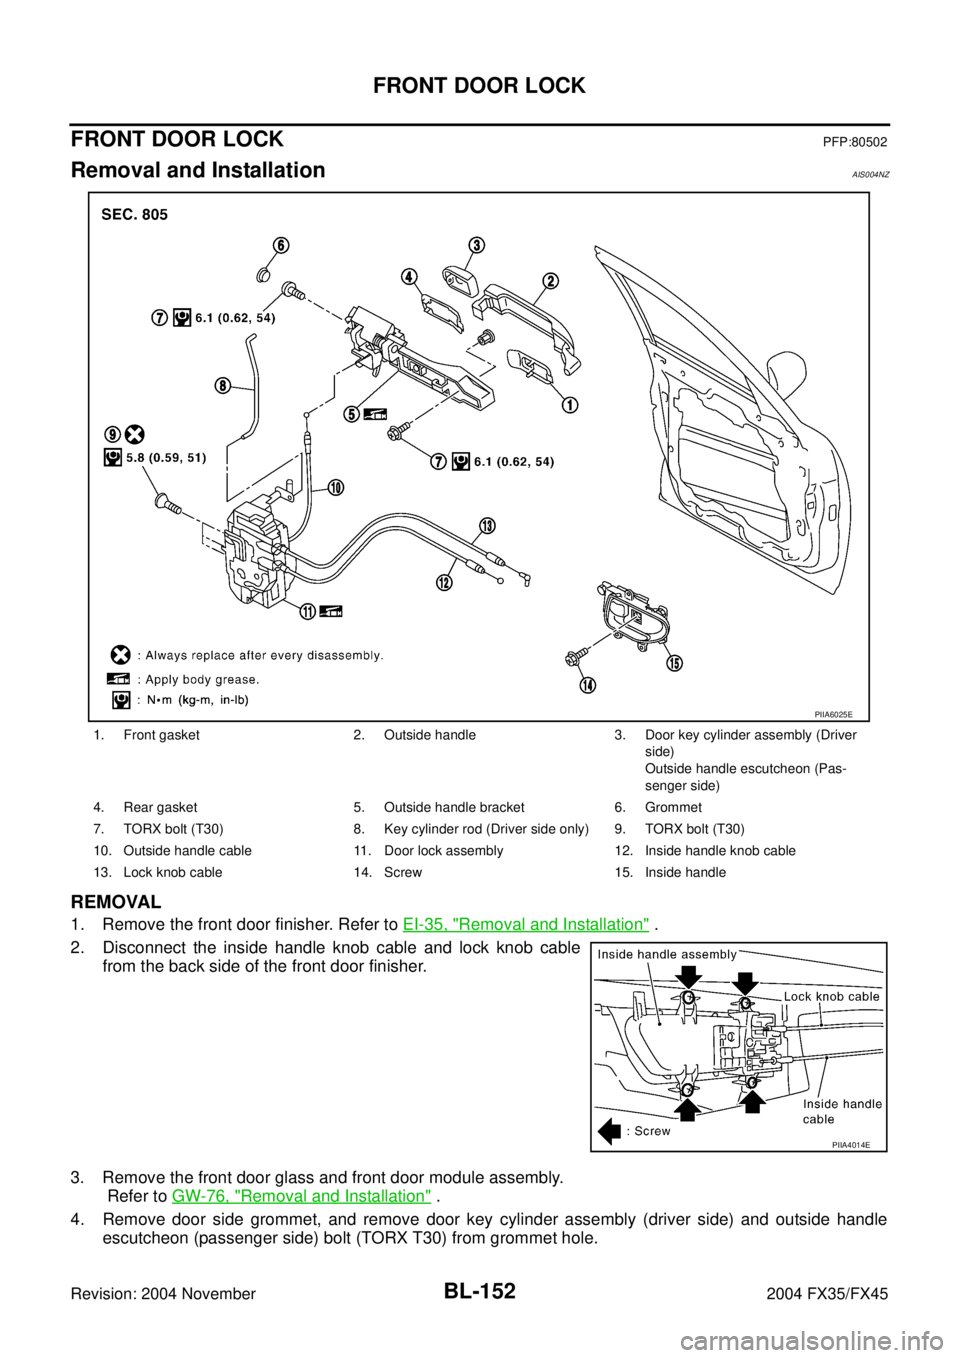 INFINITI FX35 2004  Service Manual BL-152
FRONT DOOR LOCK
Revision: 2004 November 2004 FX35/FX45
FRONT DOOR LOCKPFP:80502
Removal and InstallationAIS004NZ
REMOVAL
1. Remove the front door finisher. Refer to EI-35, "Removal and Installa